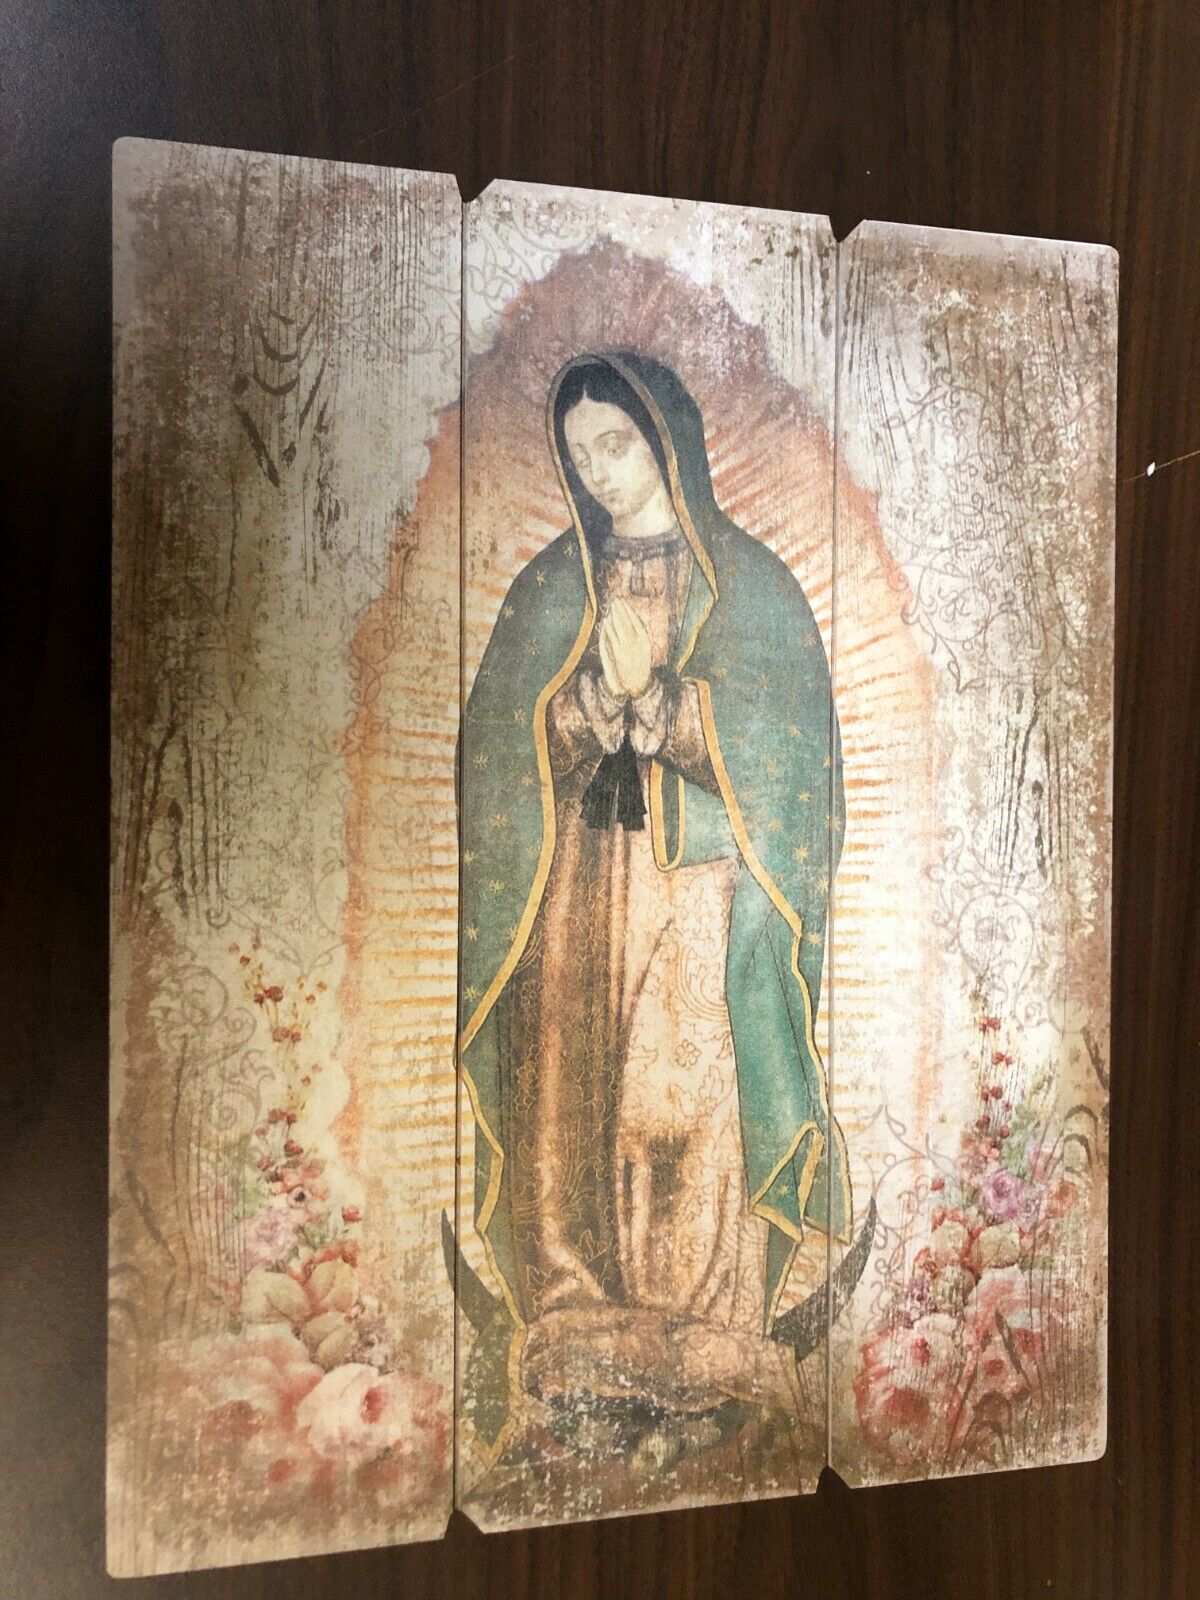 Our Lady of Guadalupe Image set on Wood Pallet,  New - Bob and Penny Lord